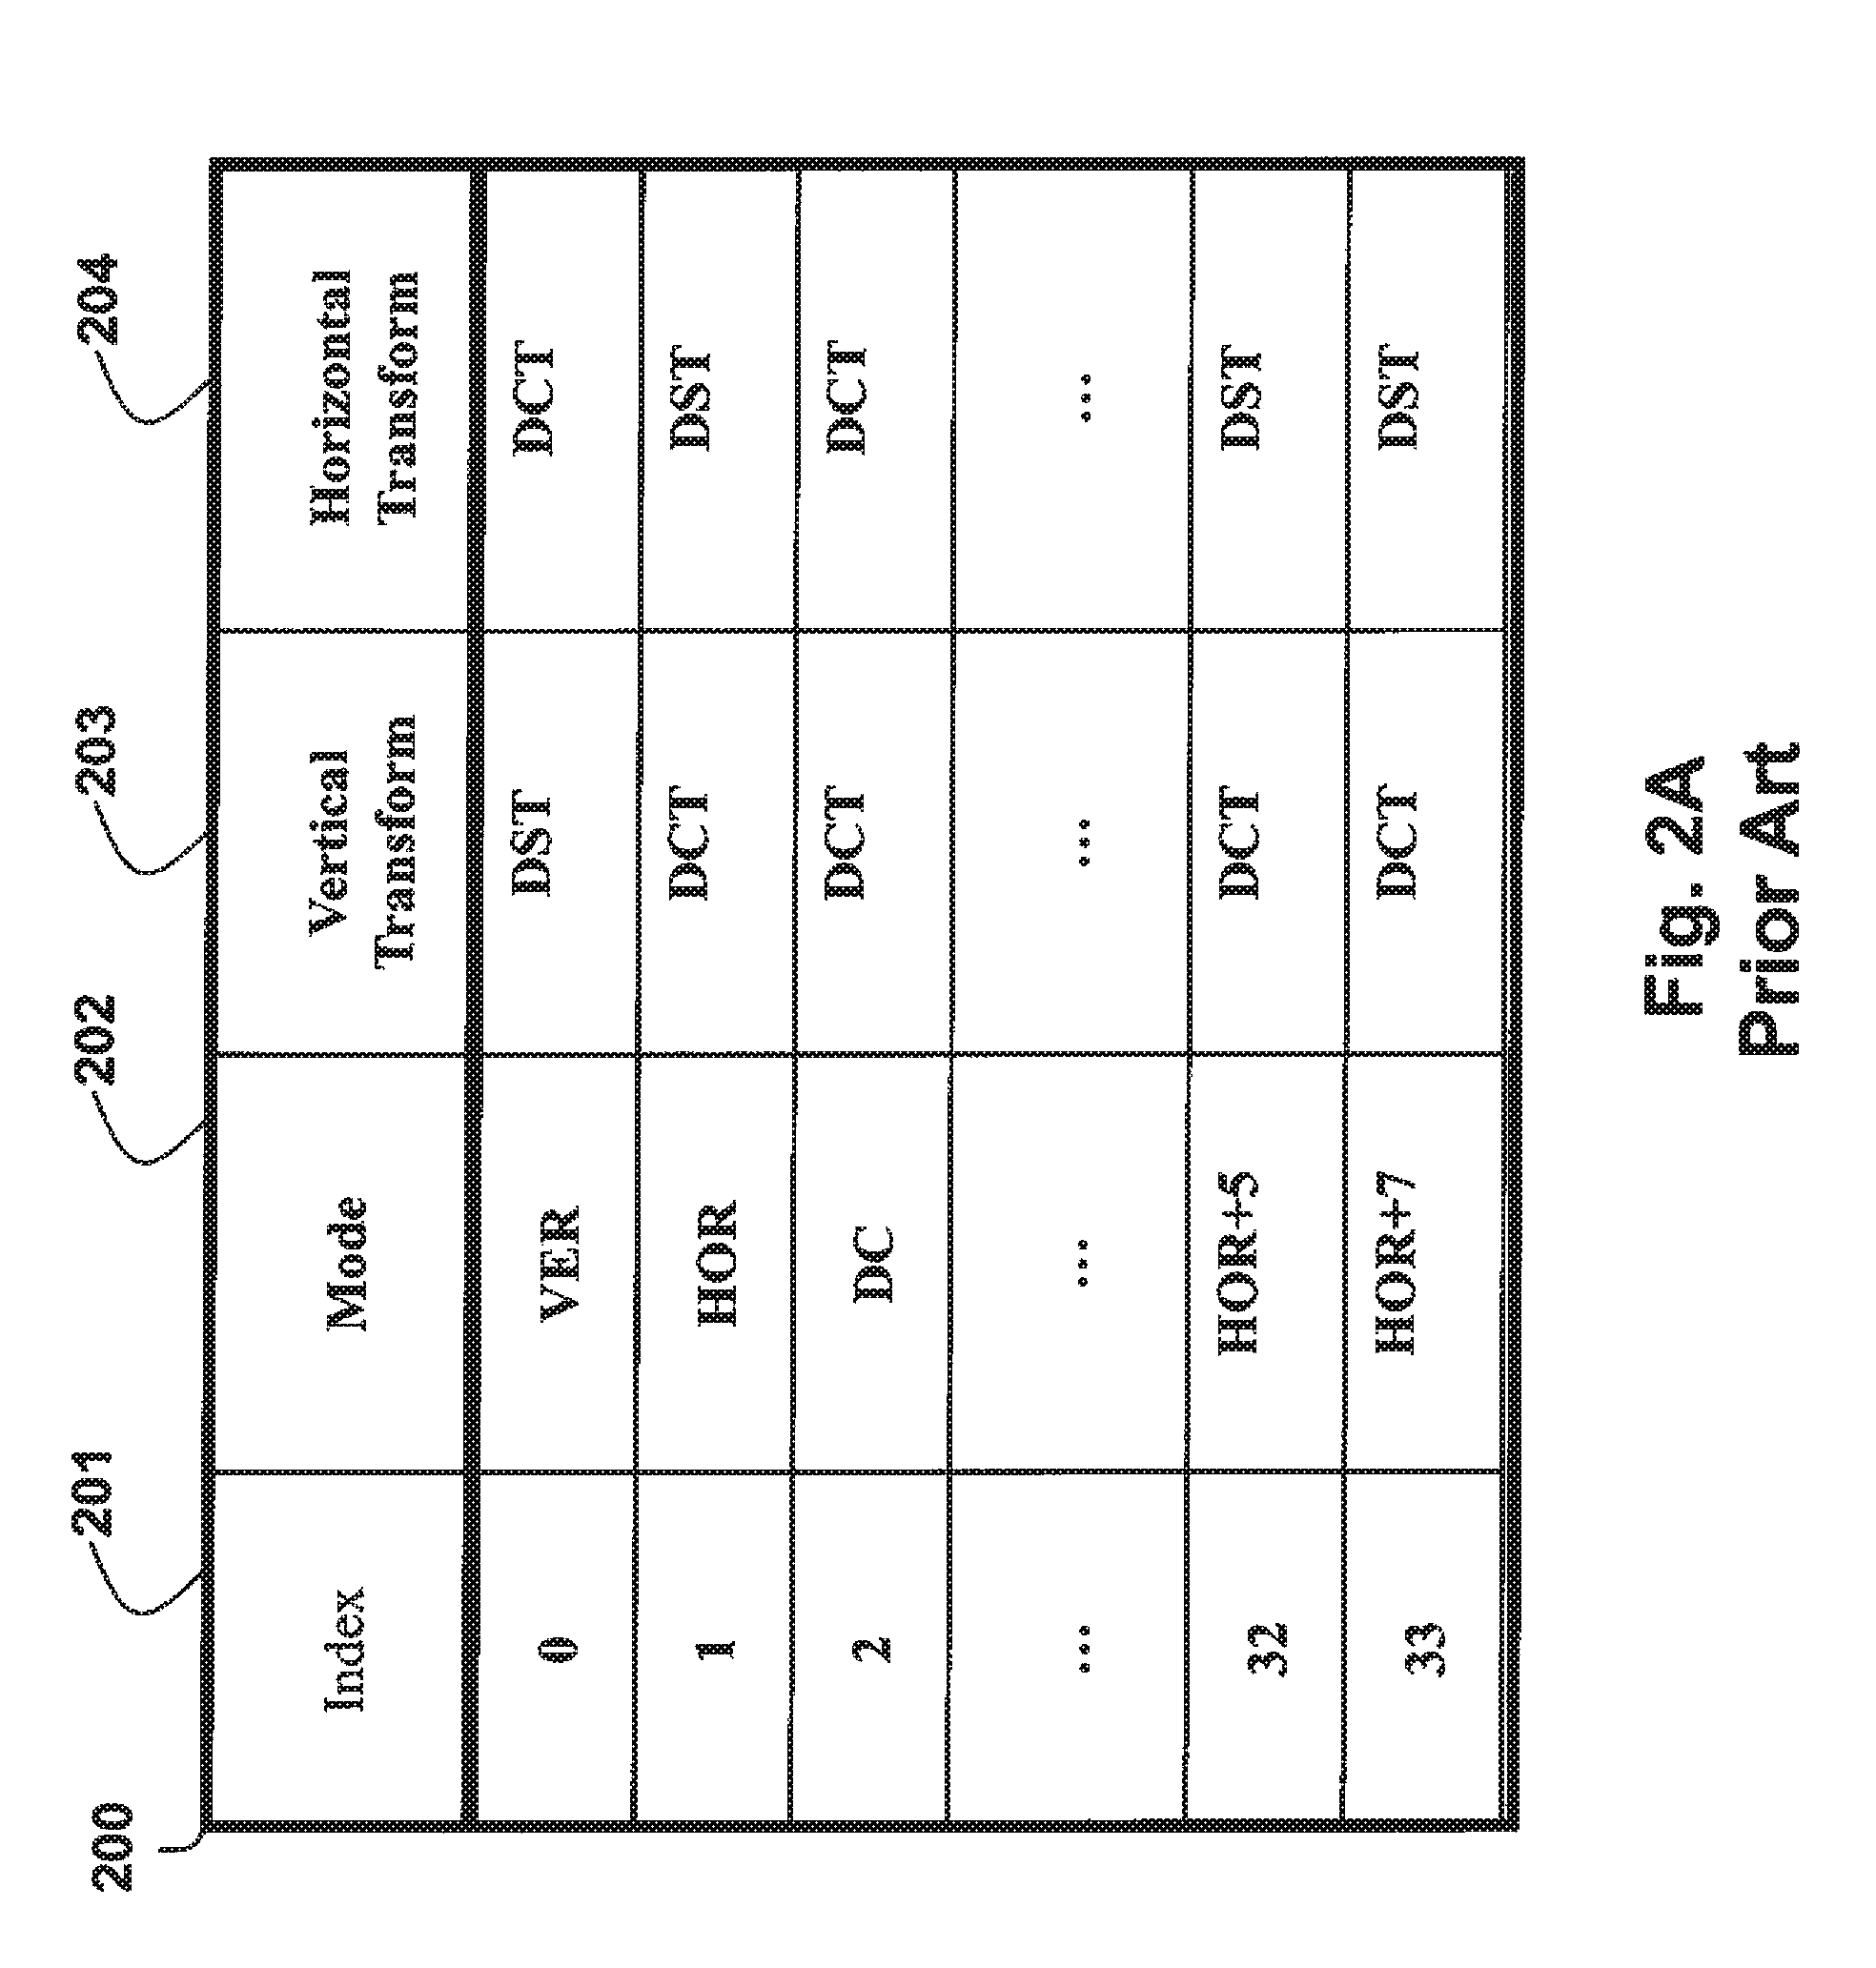 Method for selecting transform types from mapping table for prediction modes